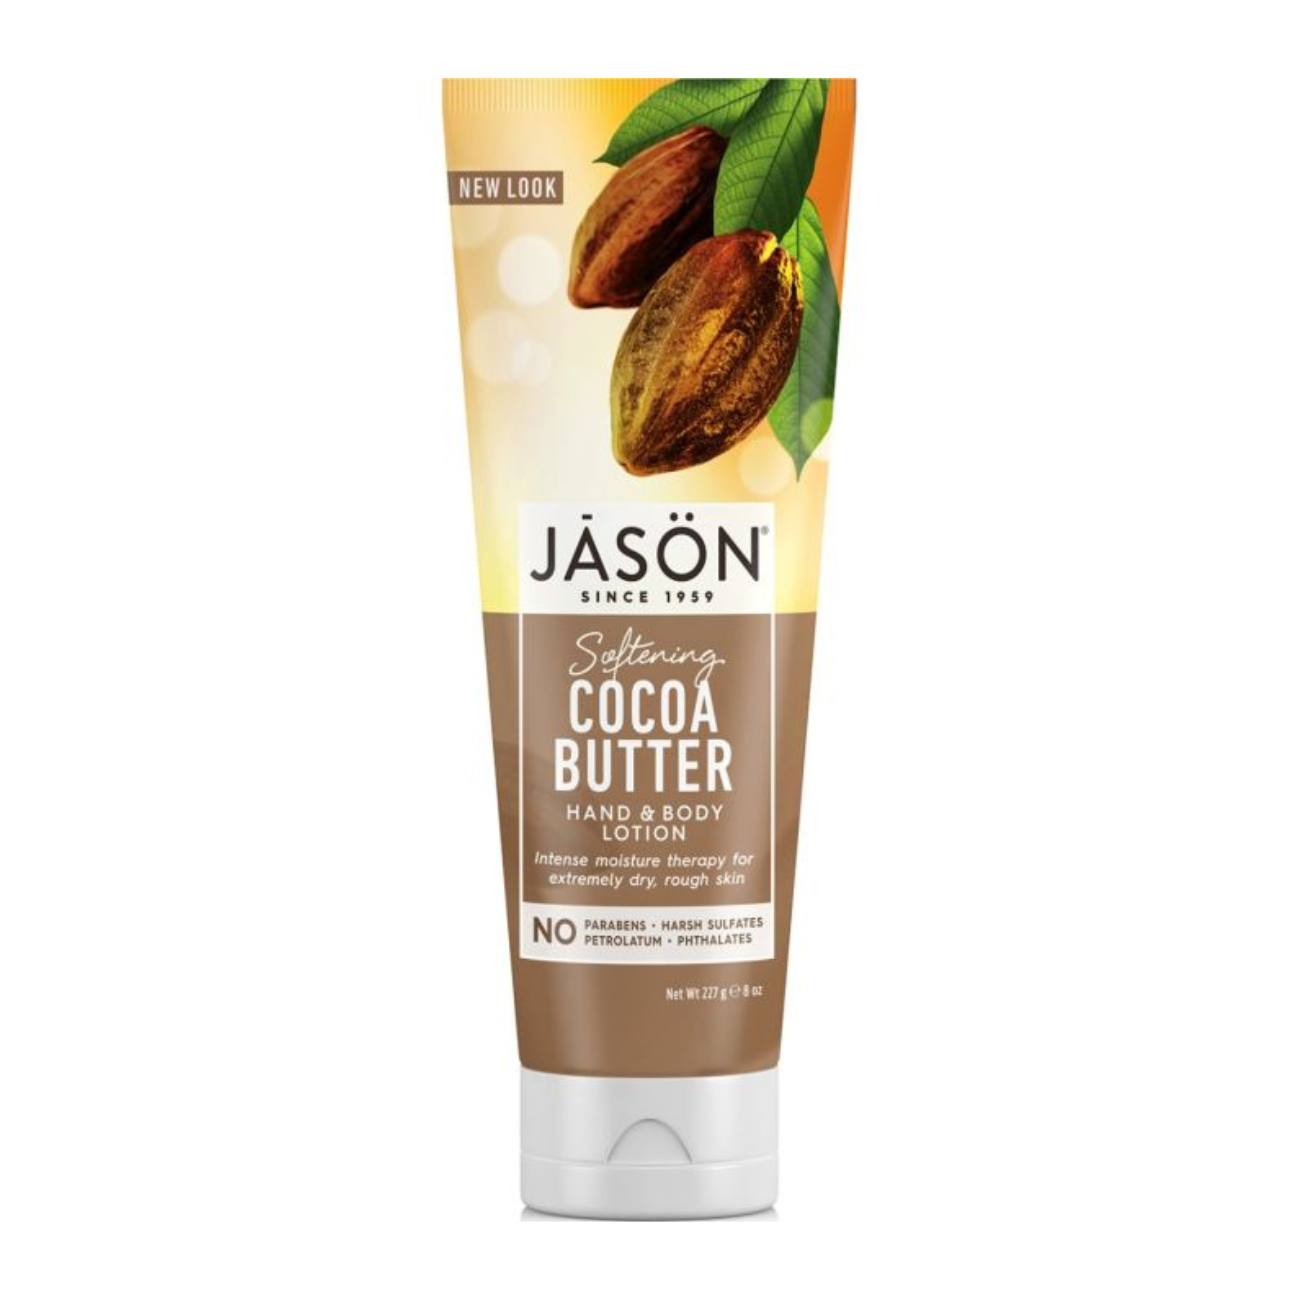 Hand & Body Lotion Softening Cocoa Butter 227g